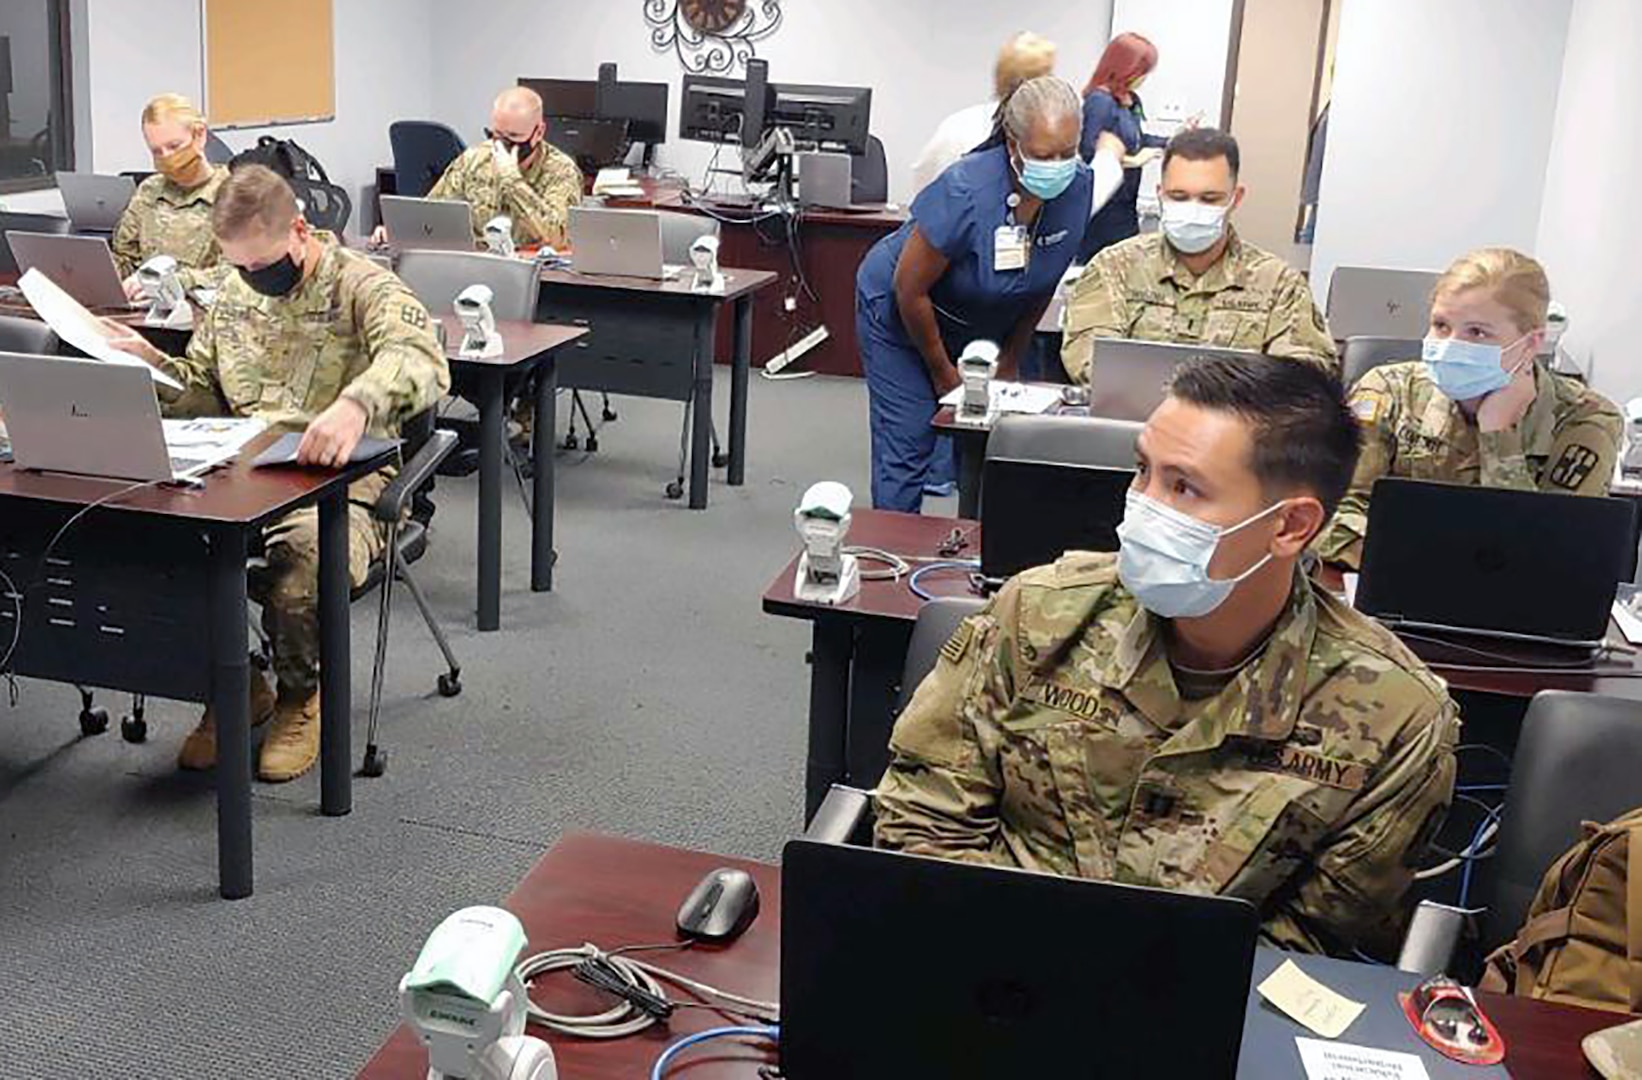 Soldiers from the Urban Augmentation Medical Task Force-627 attended integration and training at Methodist Hospital training center in San Antonio July 8, 2020.